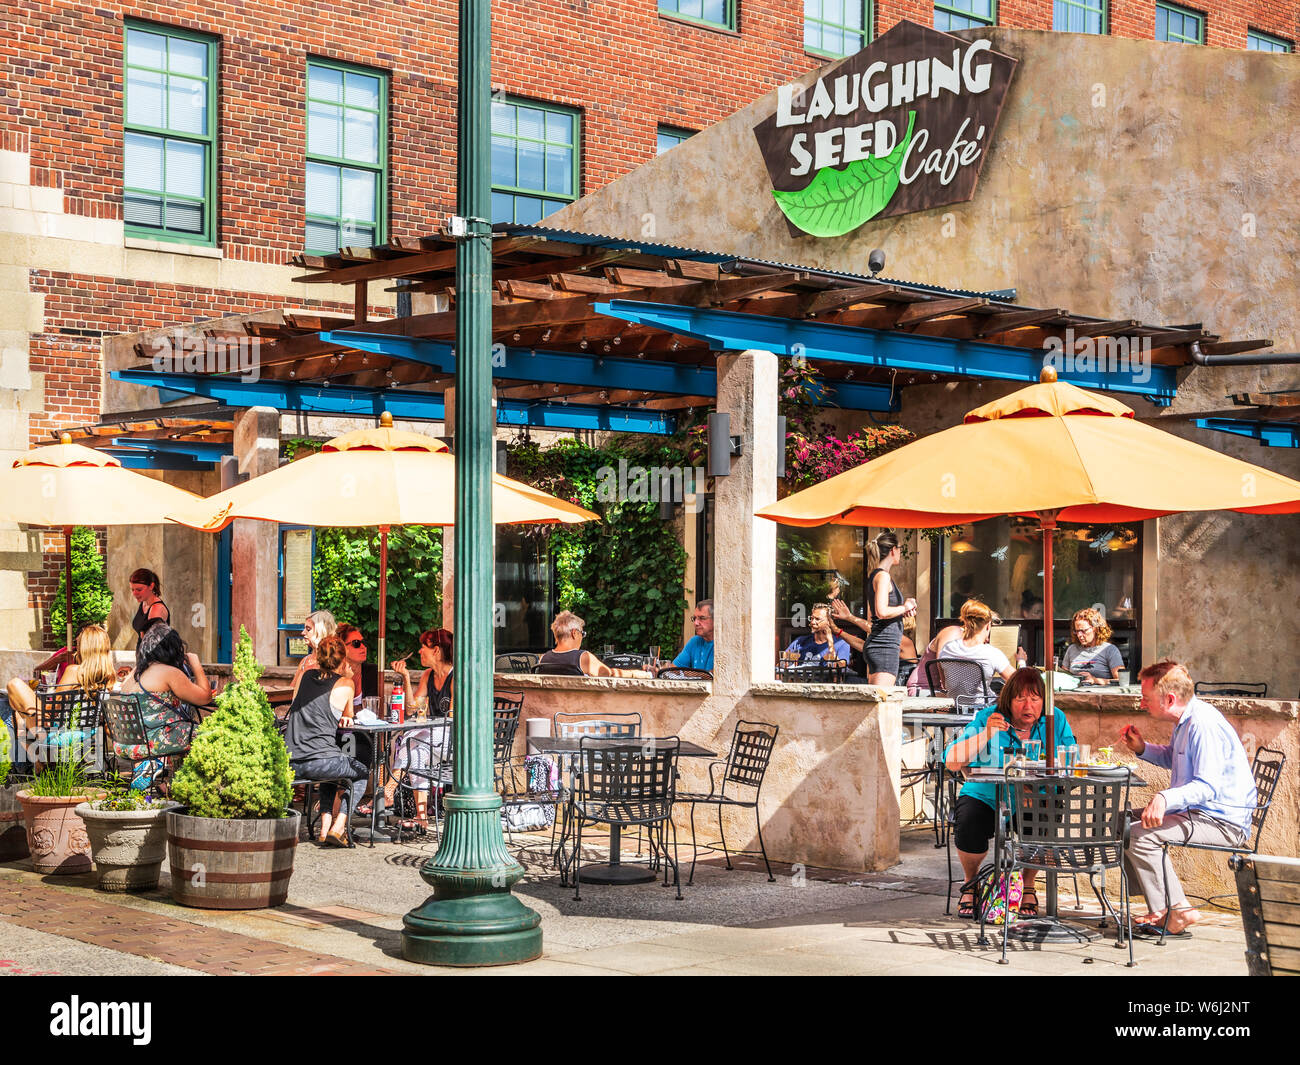 ASHEVILLE, NC, USA-27 JULY 19:  The Laughing Seed Cafe, on Wall St. in downtown Asheville, is busy with customers in the open air environment. Stock Photo